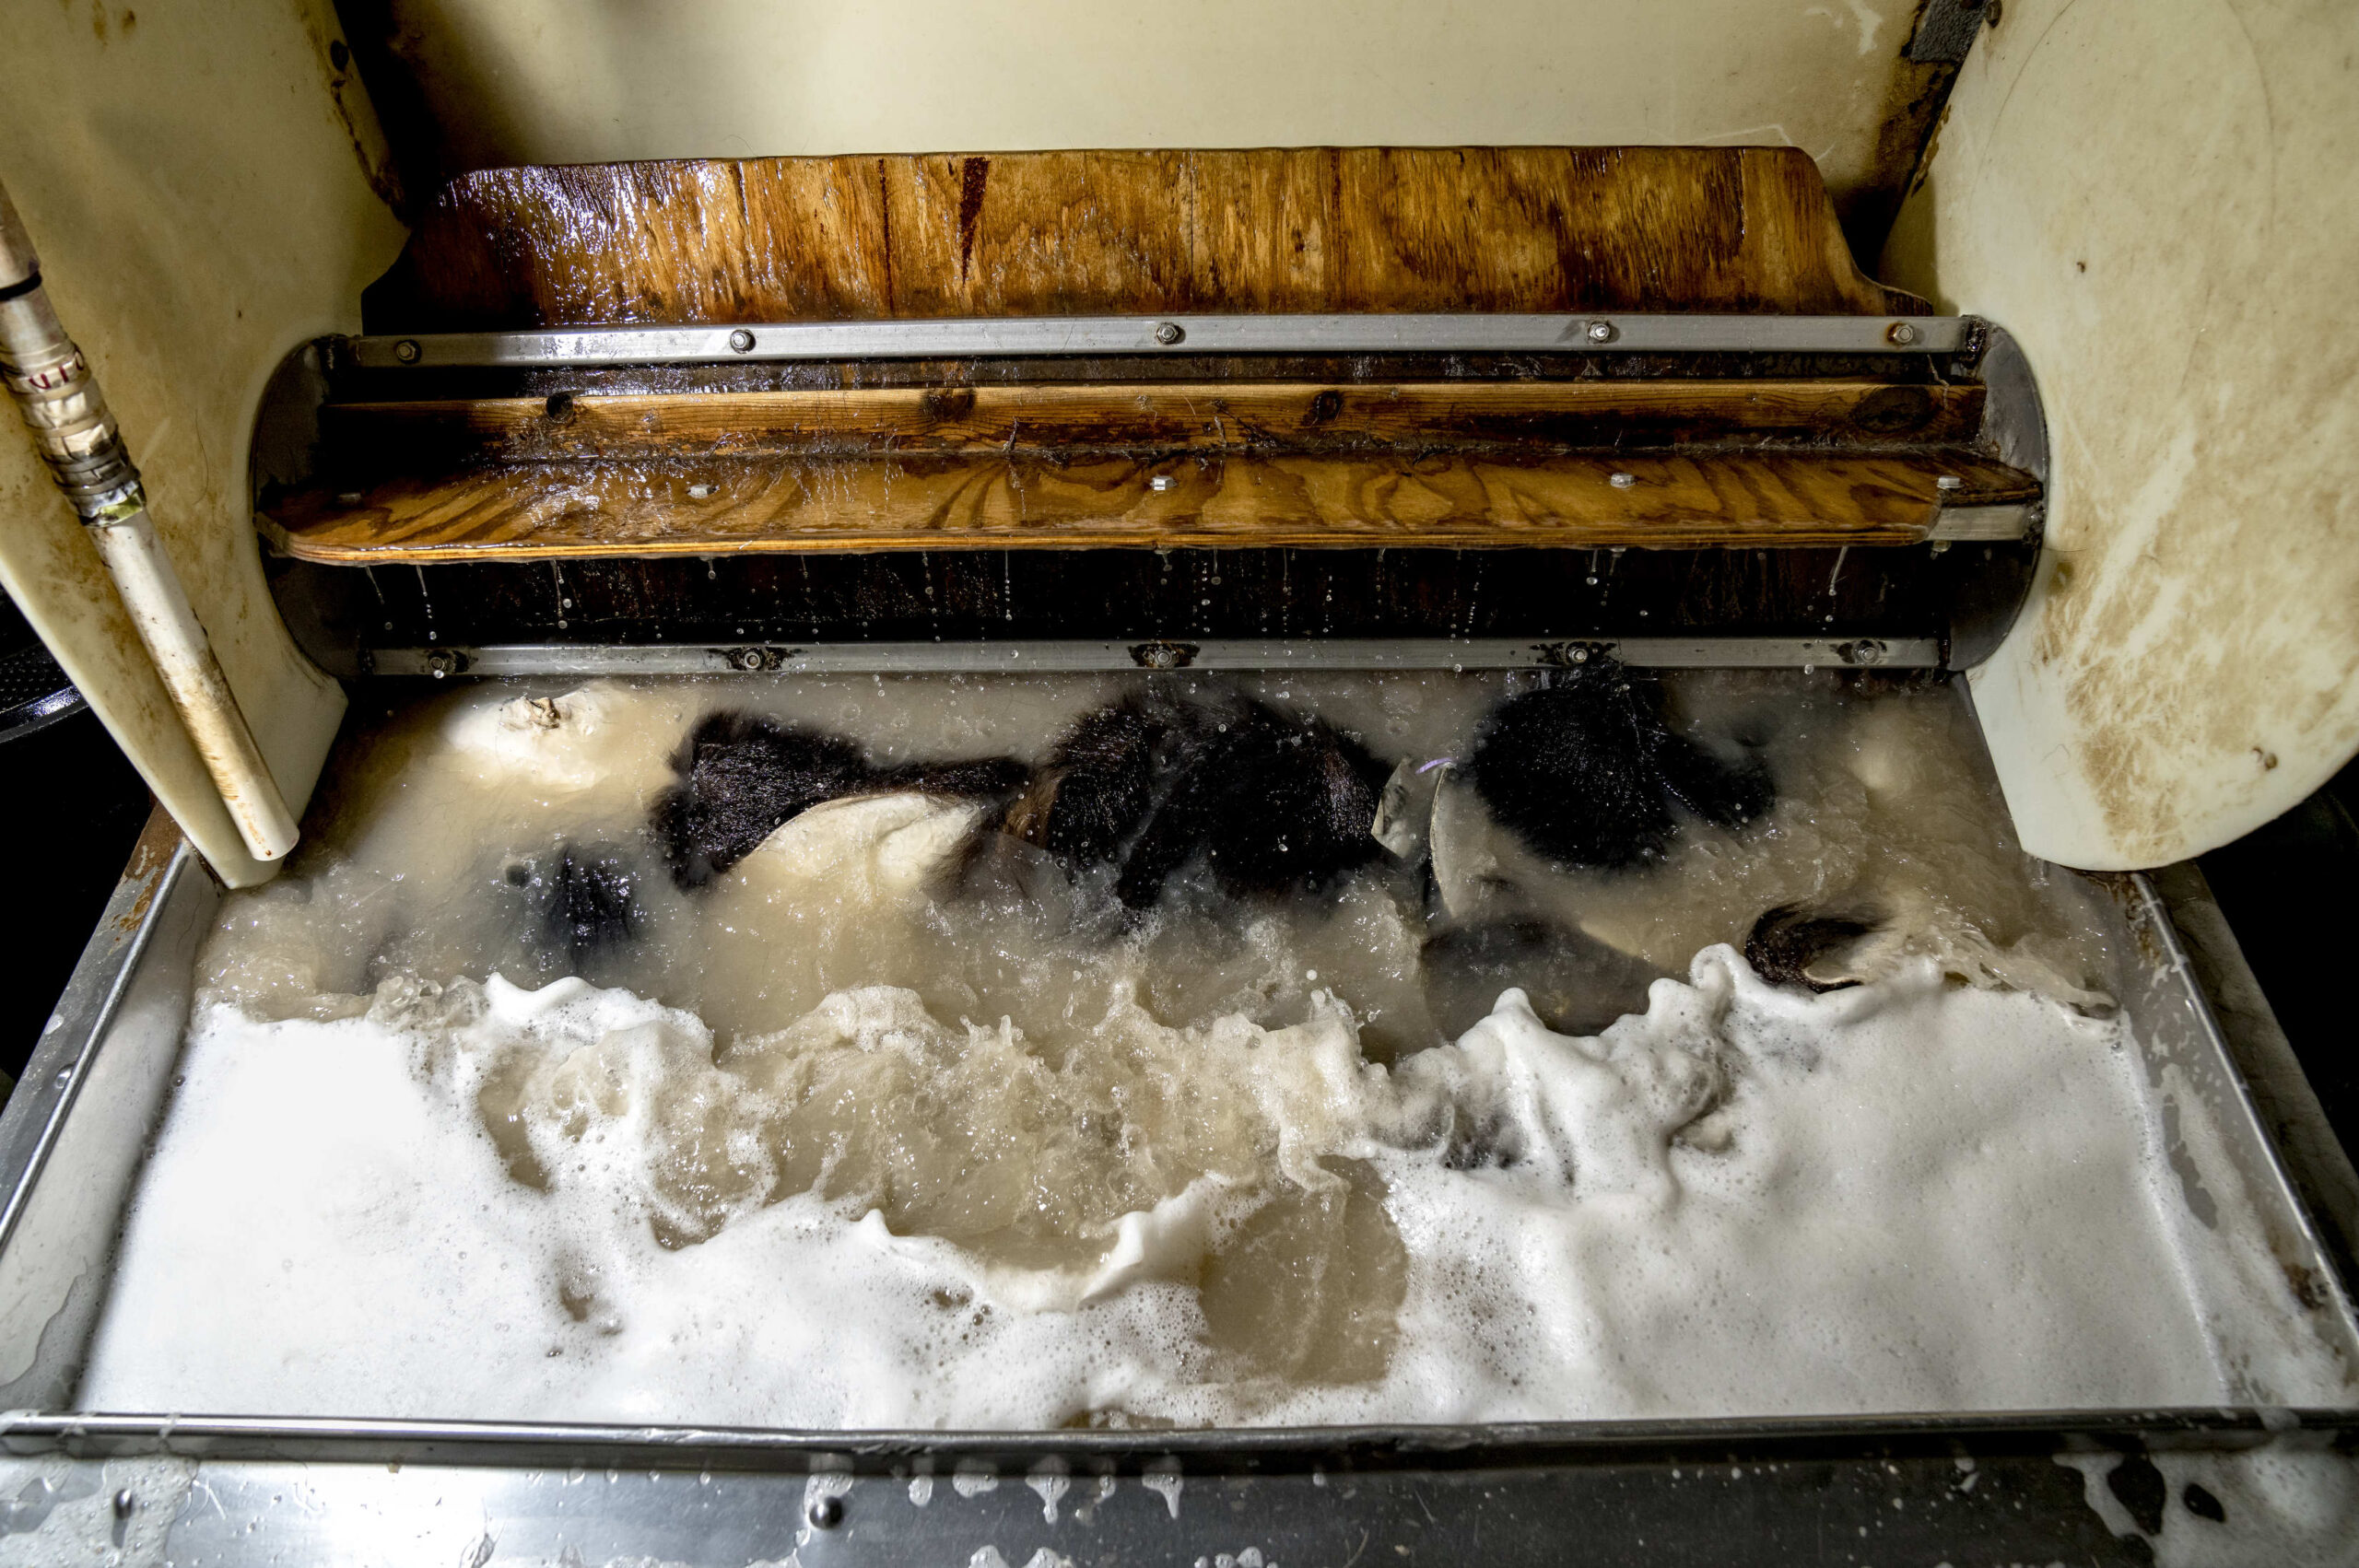 Bear hides getting washed at a tannery.